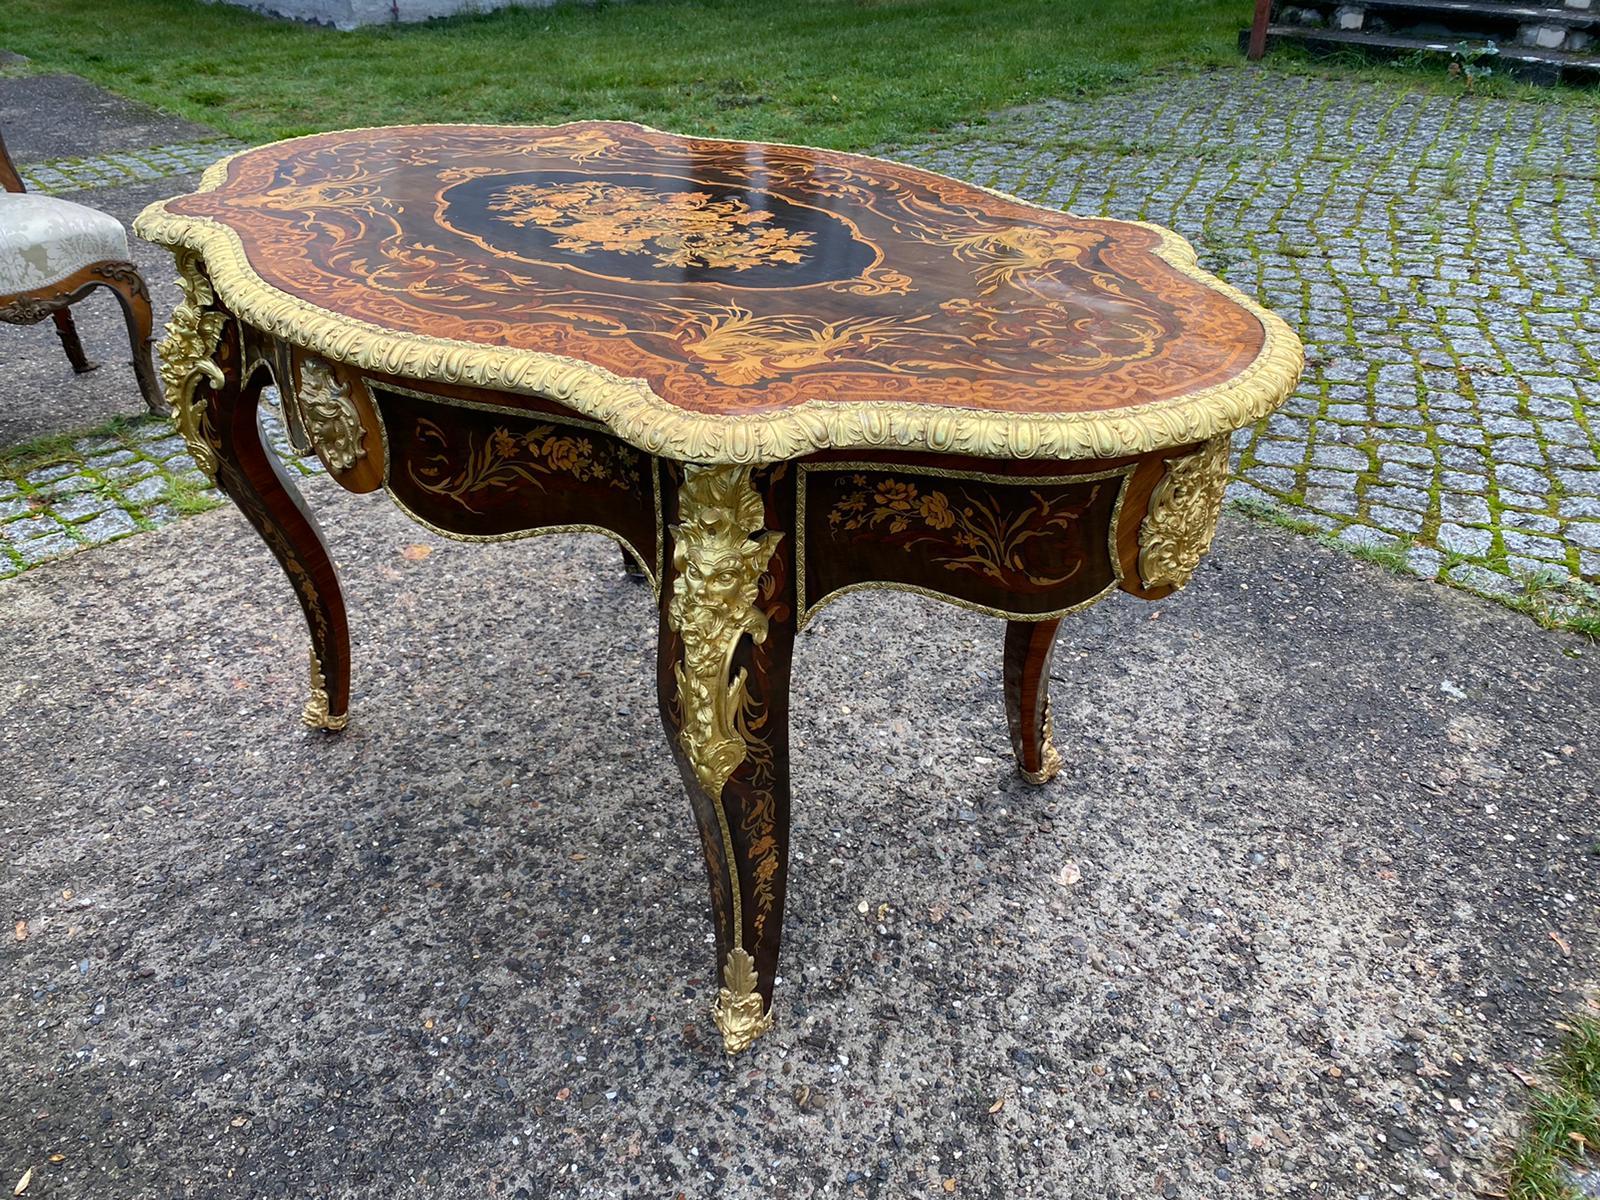 Impressive table first Empire Napoleon III
early 19th century
gilded bronzes and Inlay
Amazing marquetry work
Measures: Diameter: 152cm
Height: 79cm x 92cm
perfect condition.